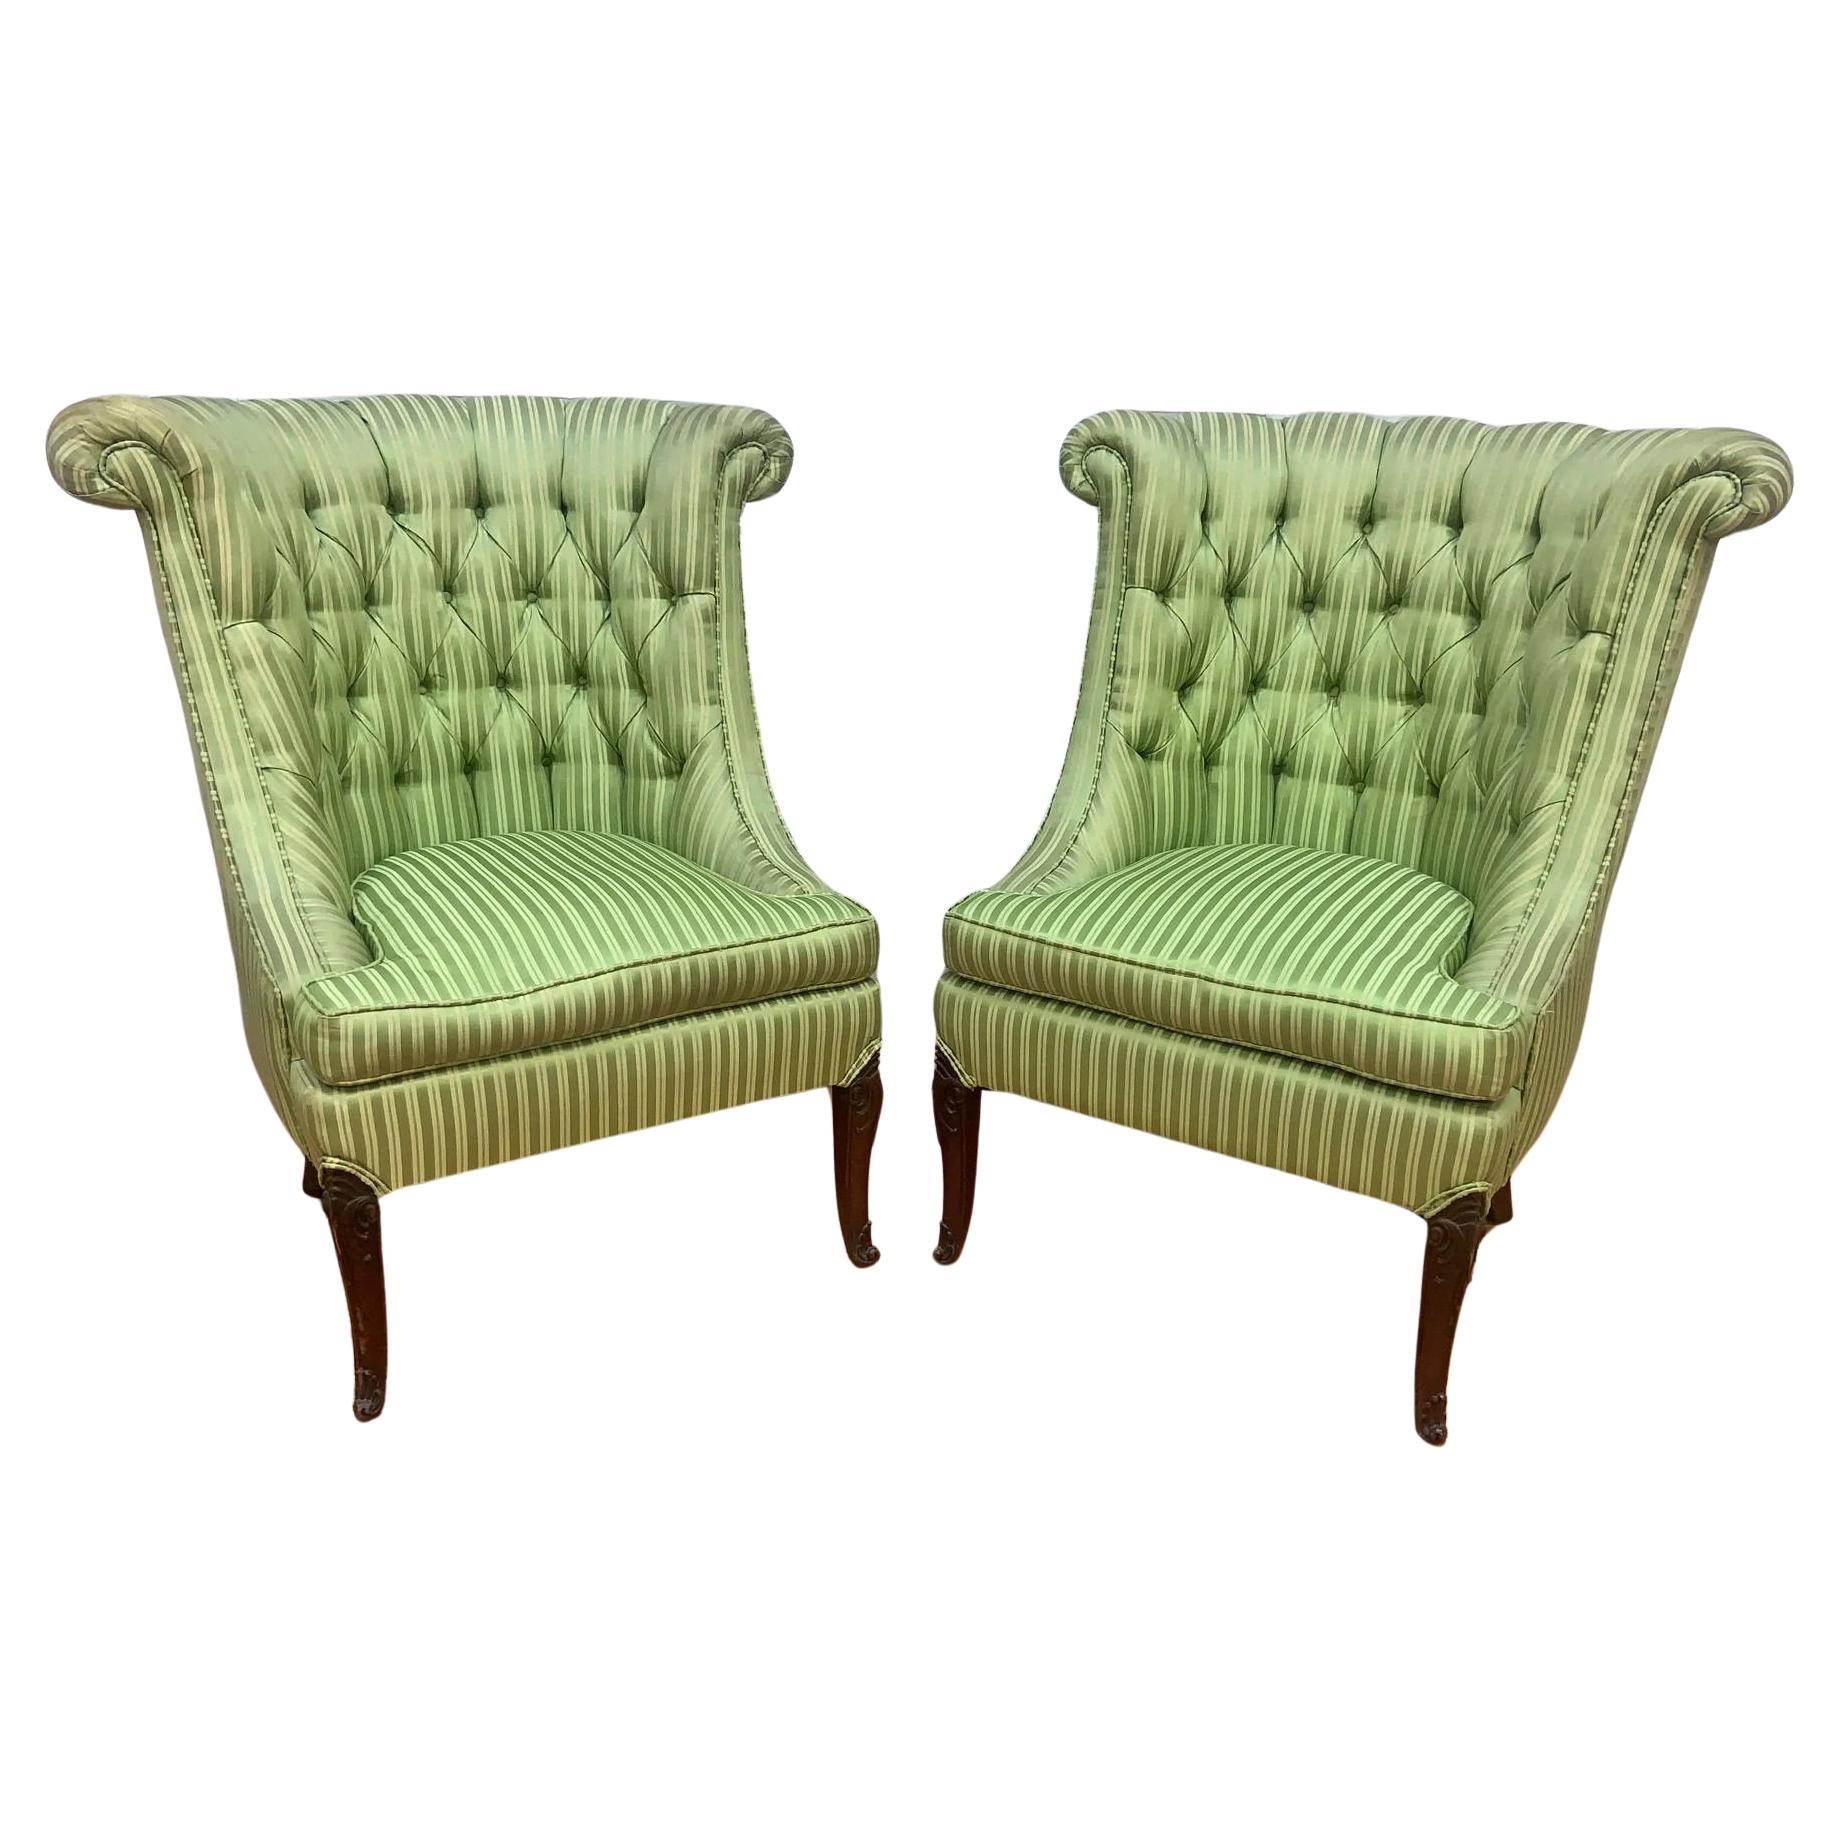 Vintage Queen Anne Style Rolled Back Tufted Wingback Chairs - Pair For Sale